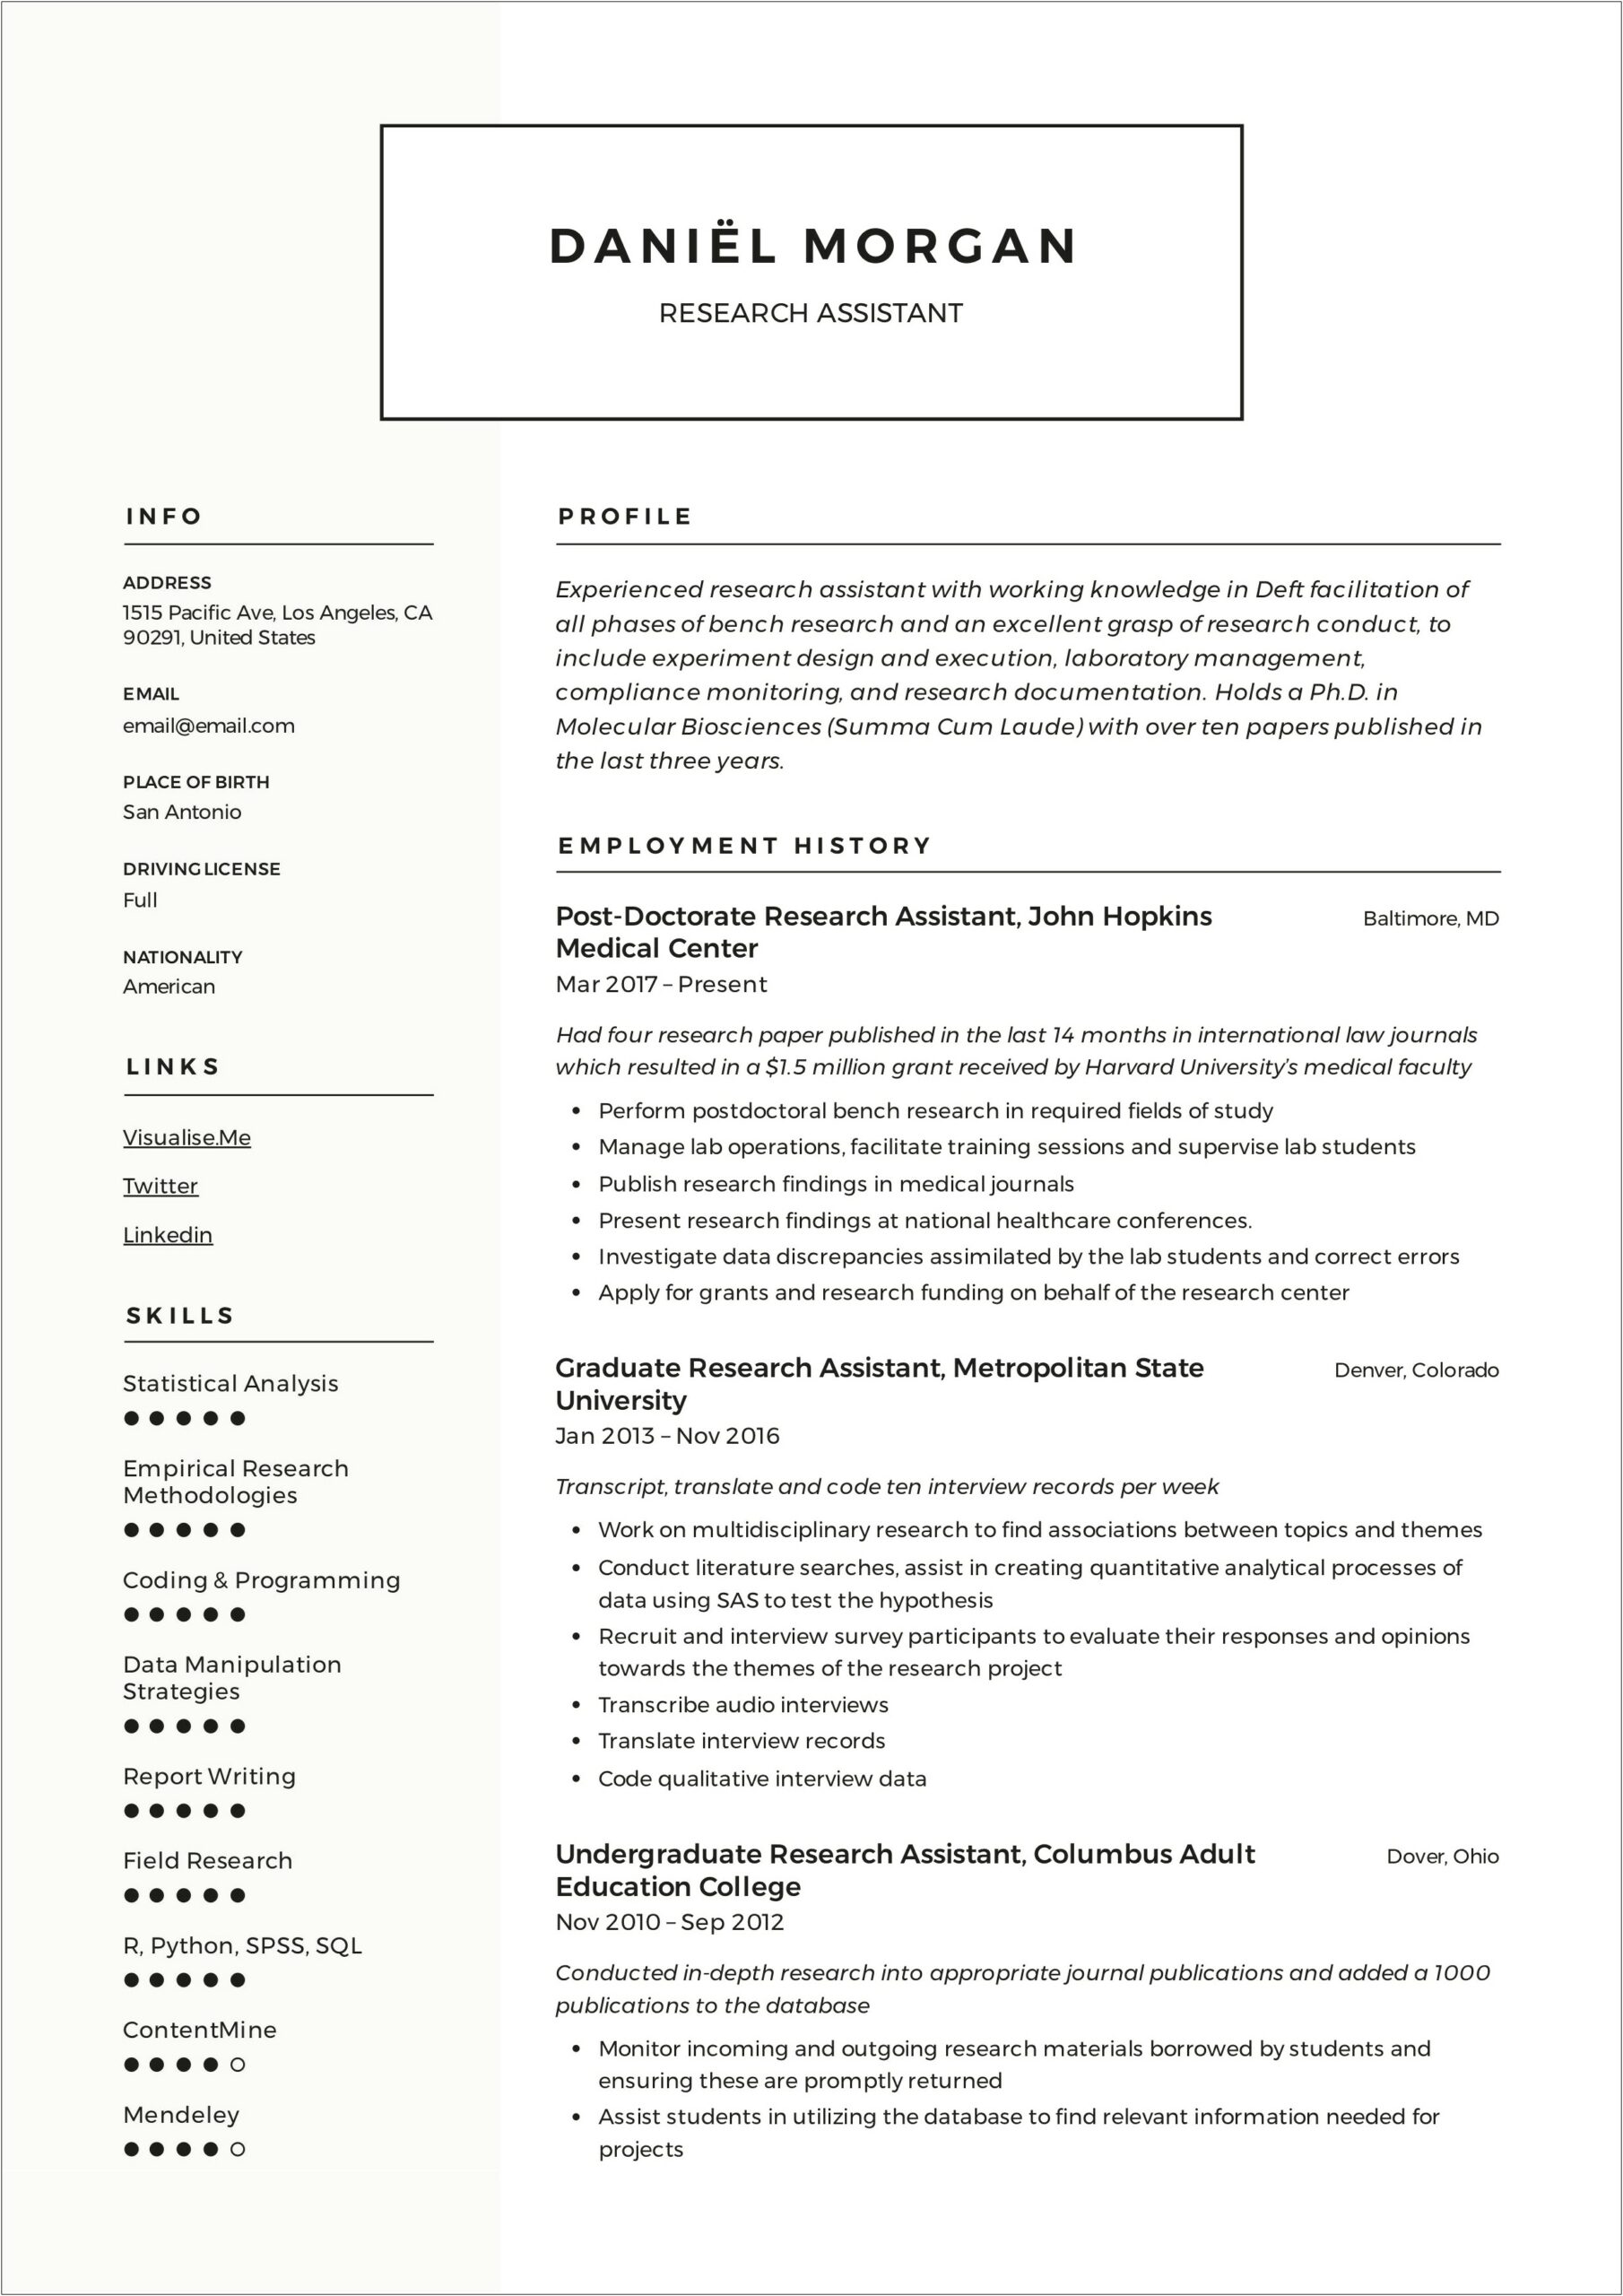 Sample Resume For Applying To A Research Position